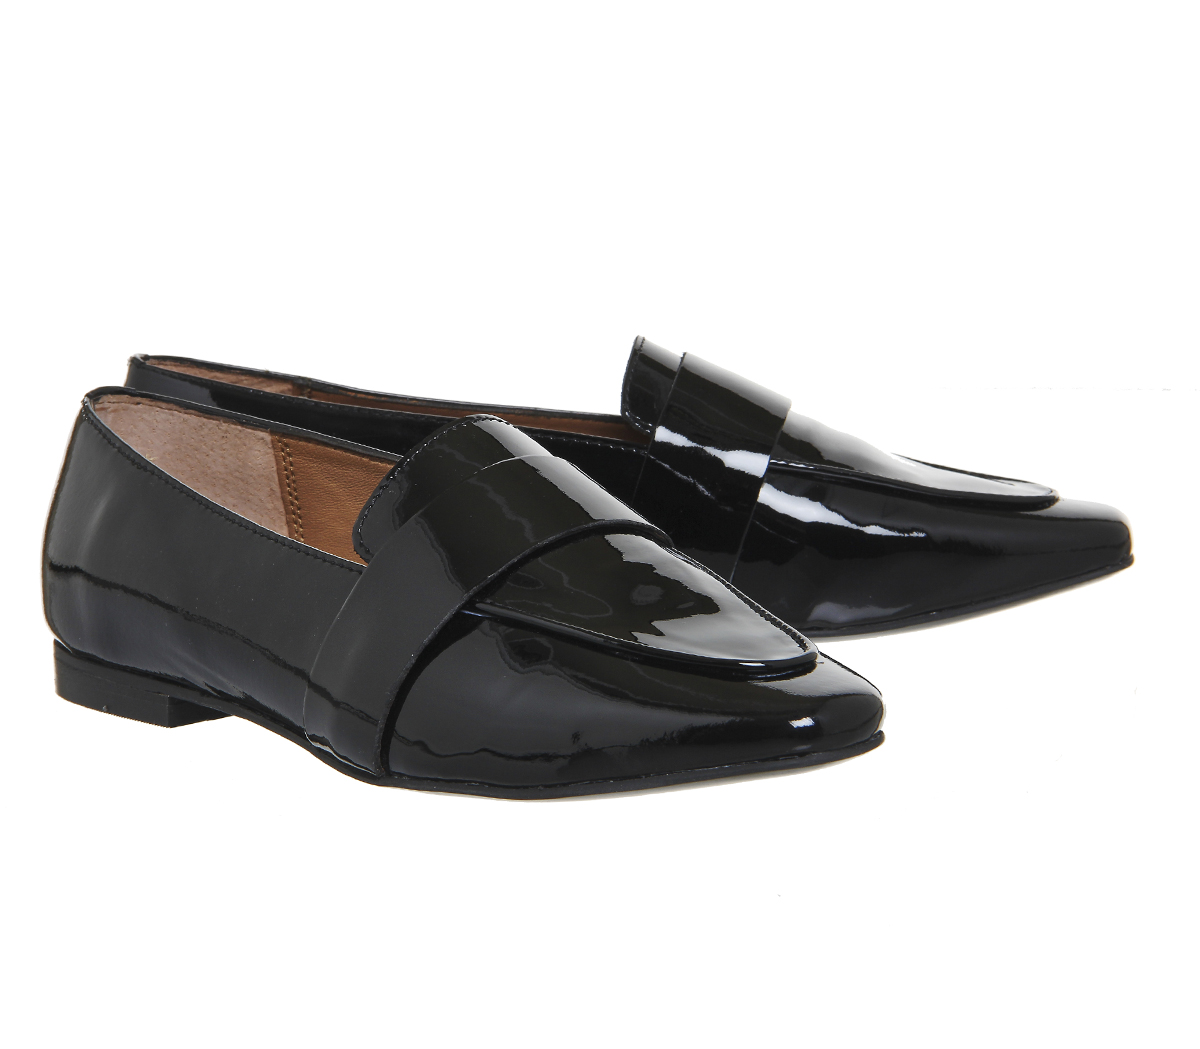 OFFICE Pip Clean Loafers Black Patent Leather - Flat Shoes for Women